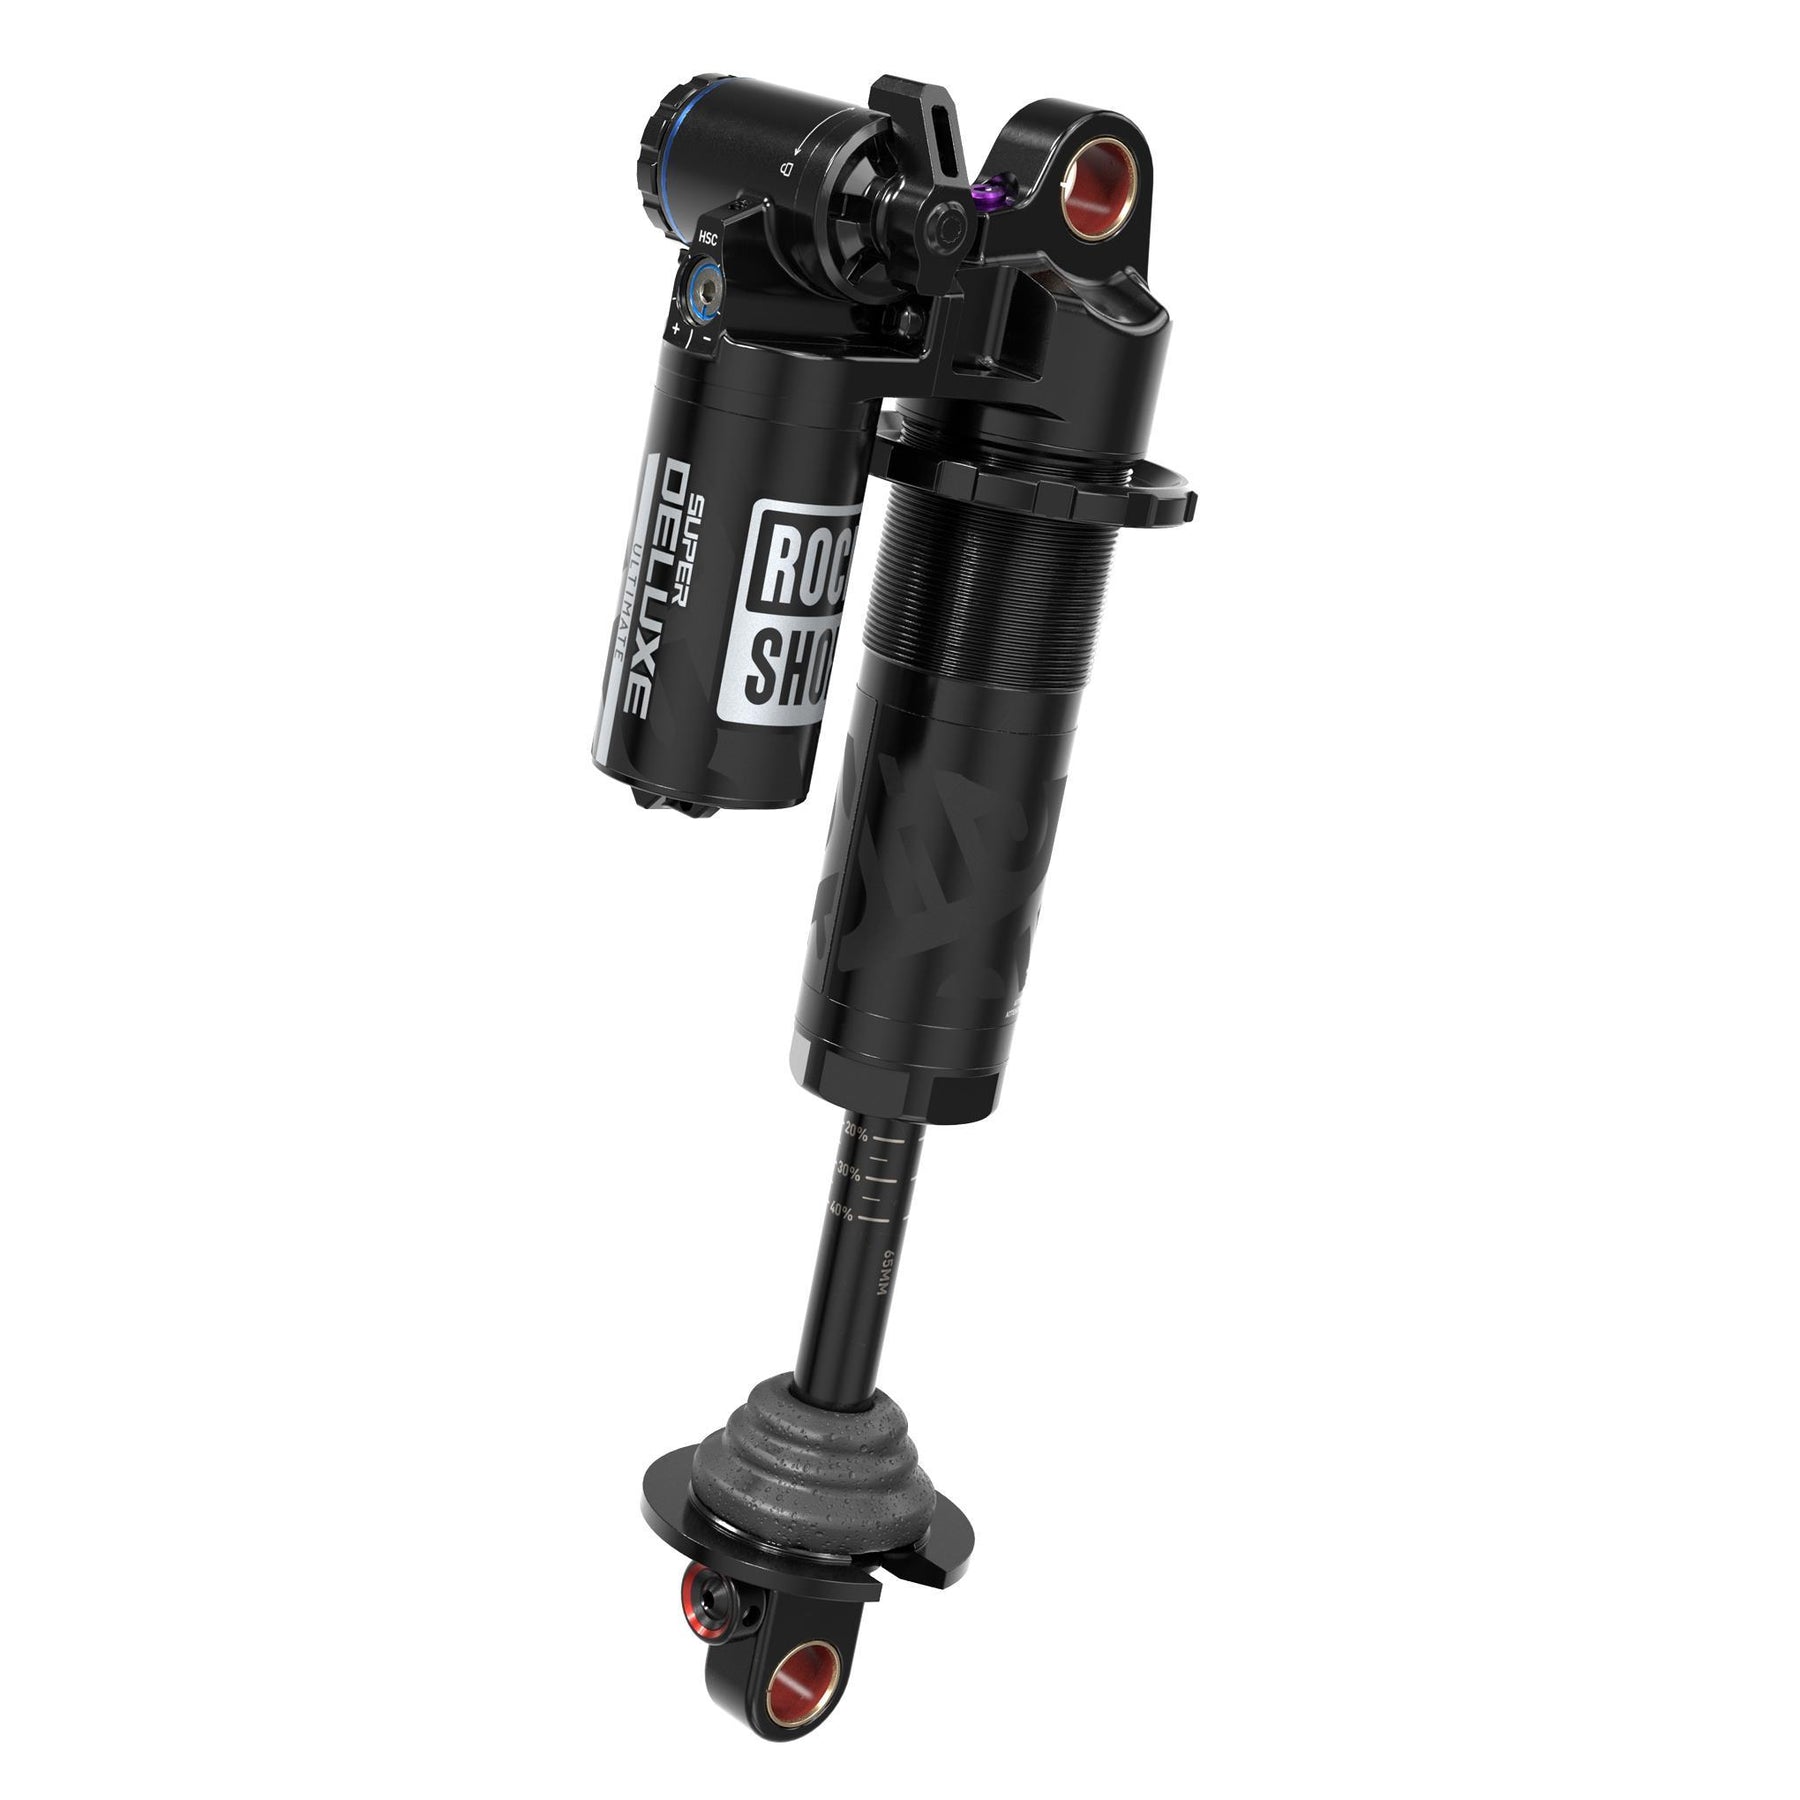 Rockshox Super Deluxe Coil Ultimate Rear Shock RC2T - Linearreb/Mcomp, 320LB Lockout, Hydraulic Bottom Out, Standard Bearing(Spring Sold Separate) B1 Santa Cruz Nomad 4 2017-2020 Black 230X60